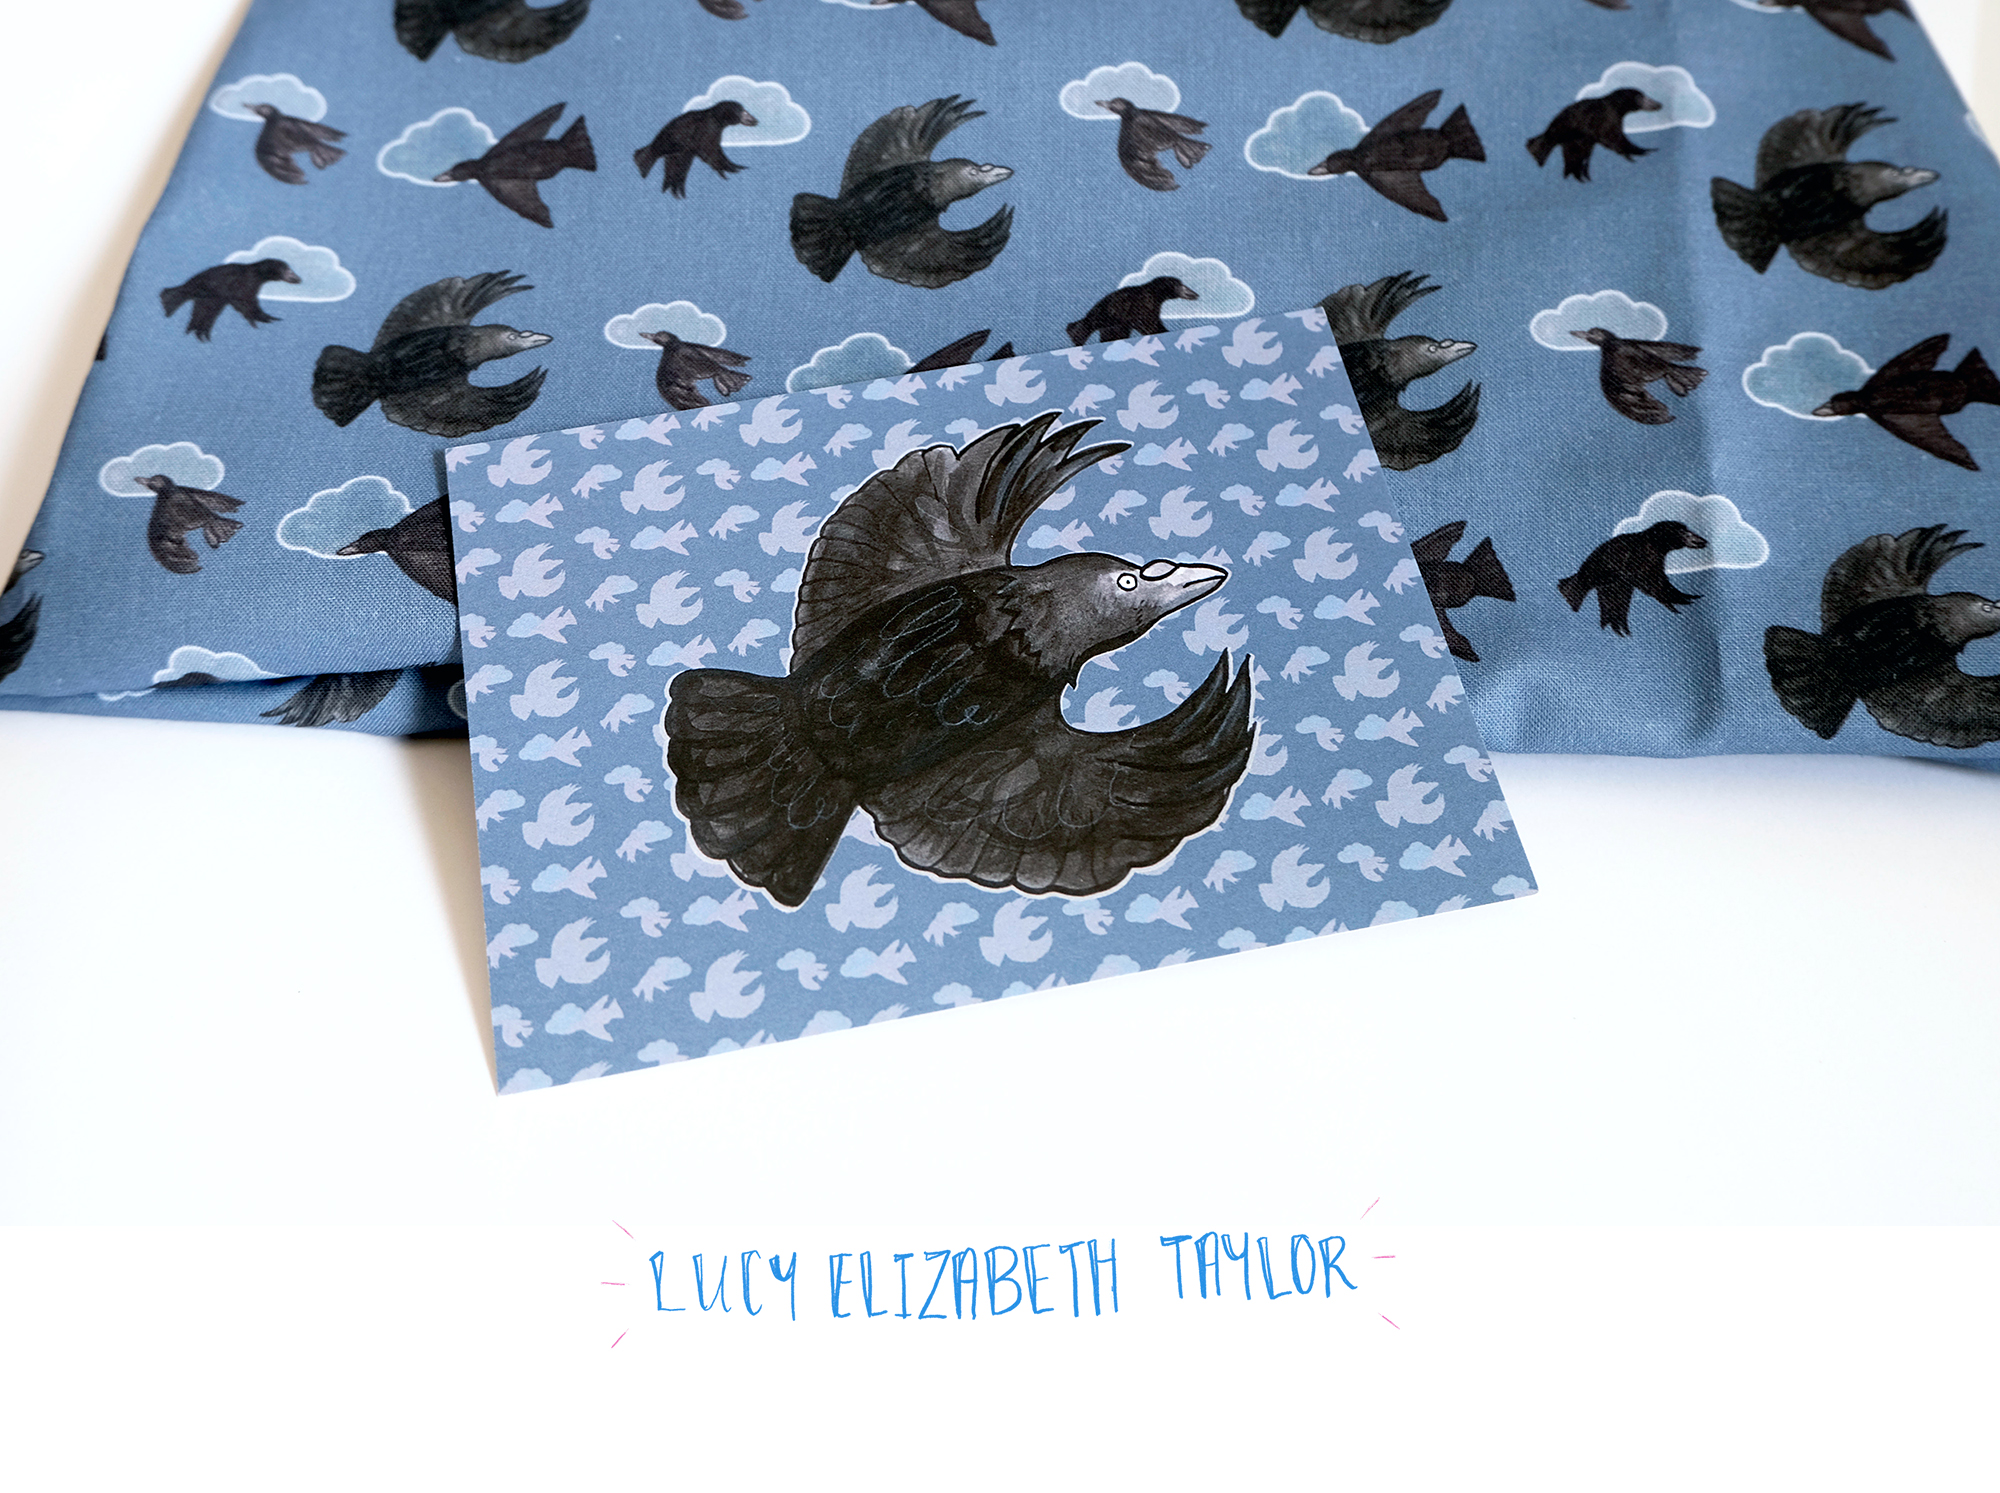 A folded piece of fabric featuring crow and cloud pattern, rested on top is a postcard also featuring Lucy Elizabeth Taylor's flying crow design.